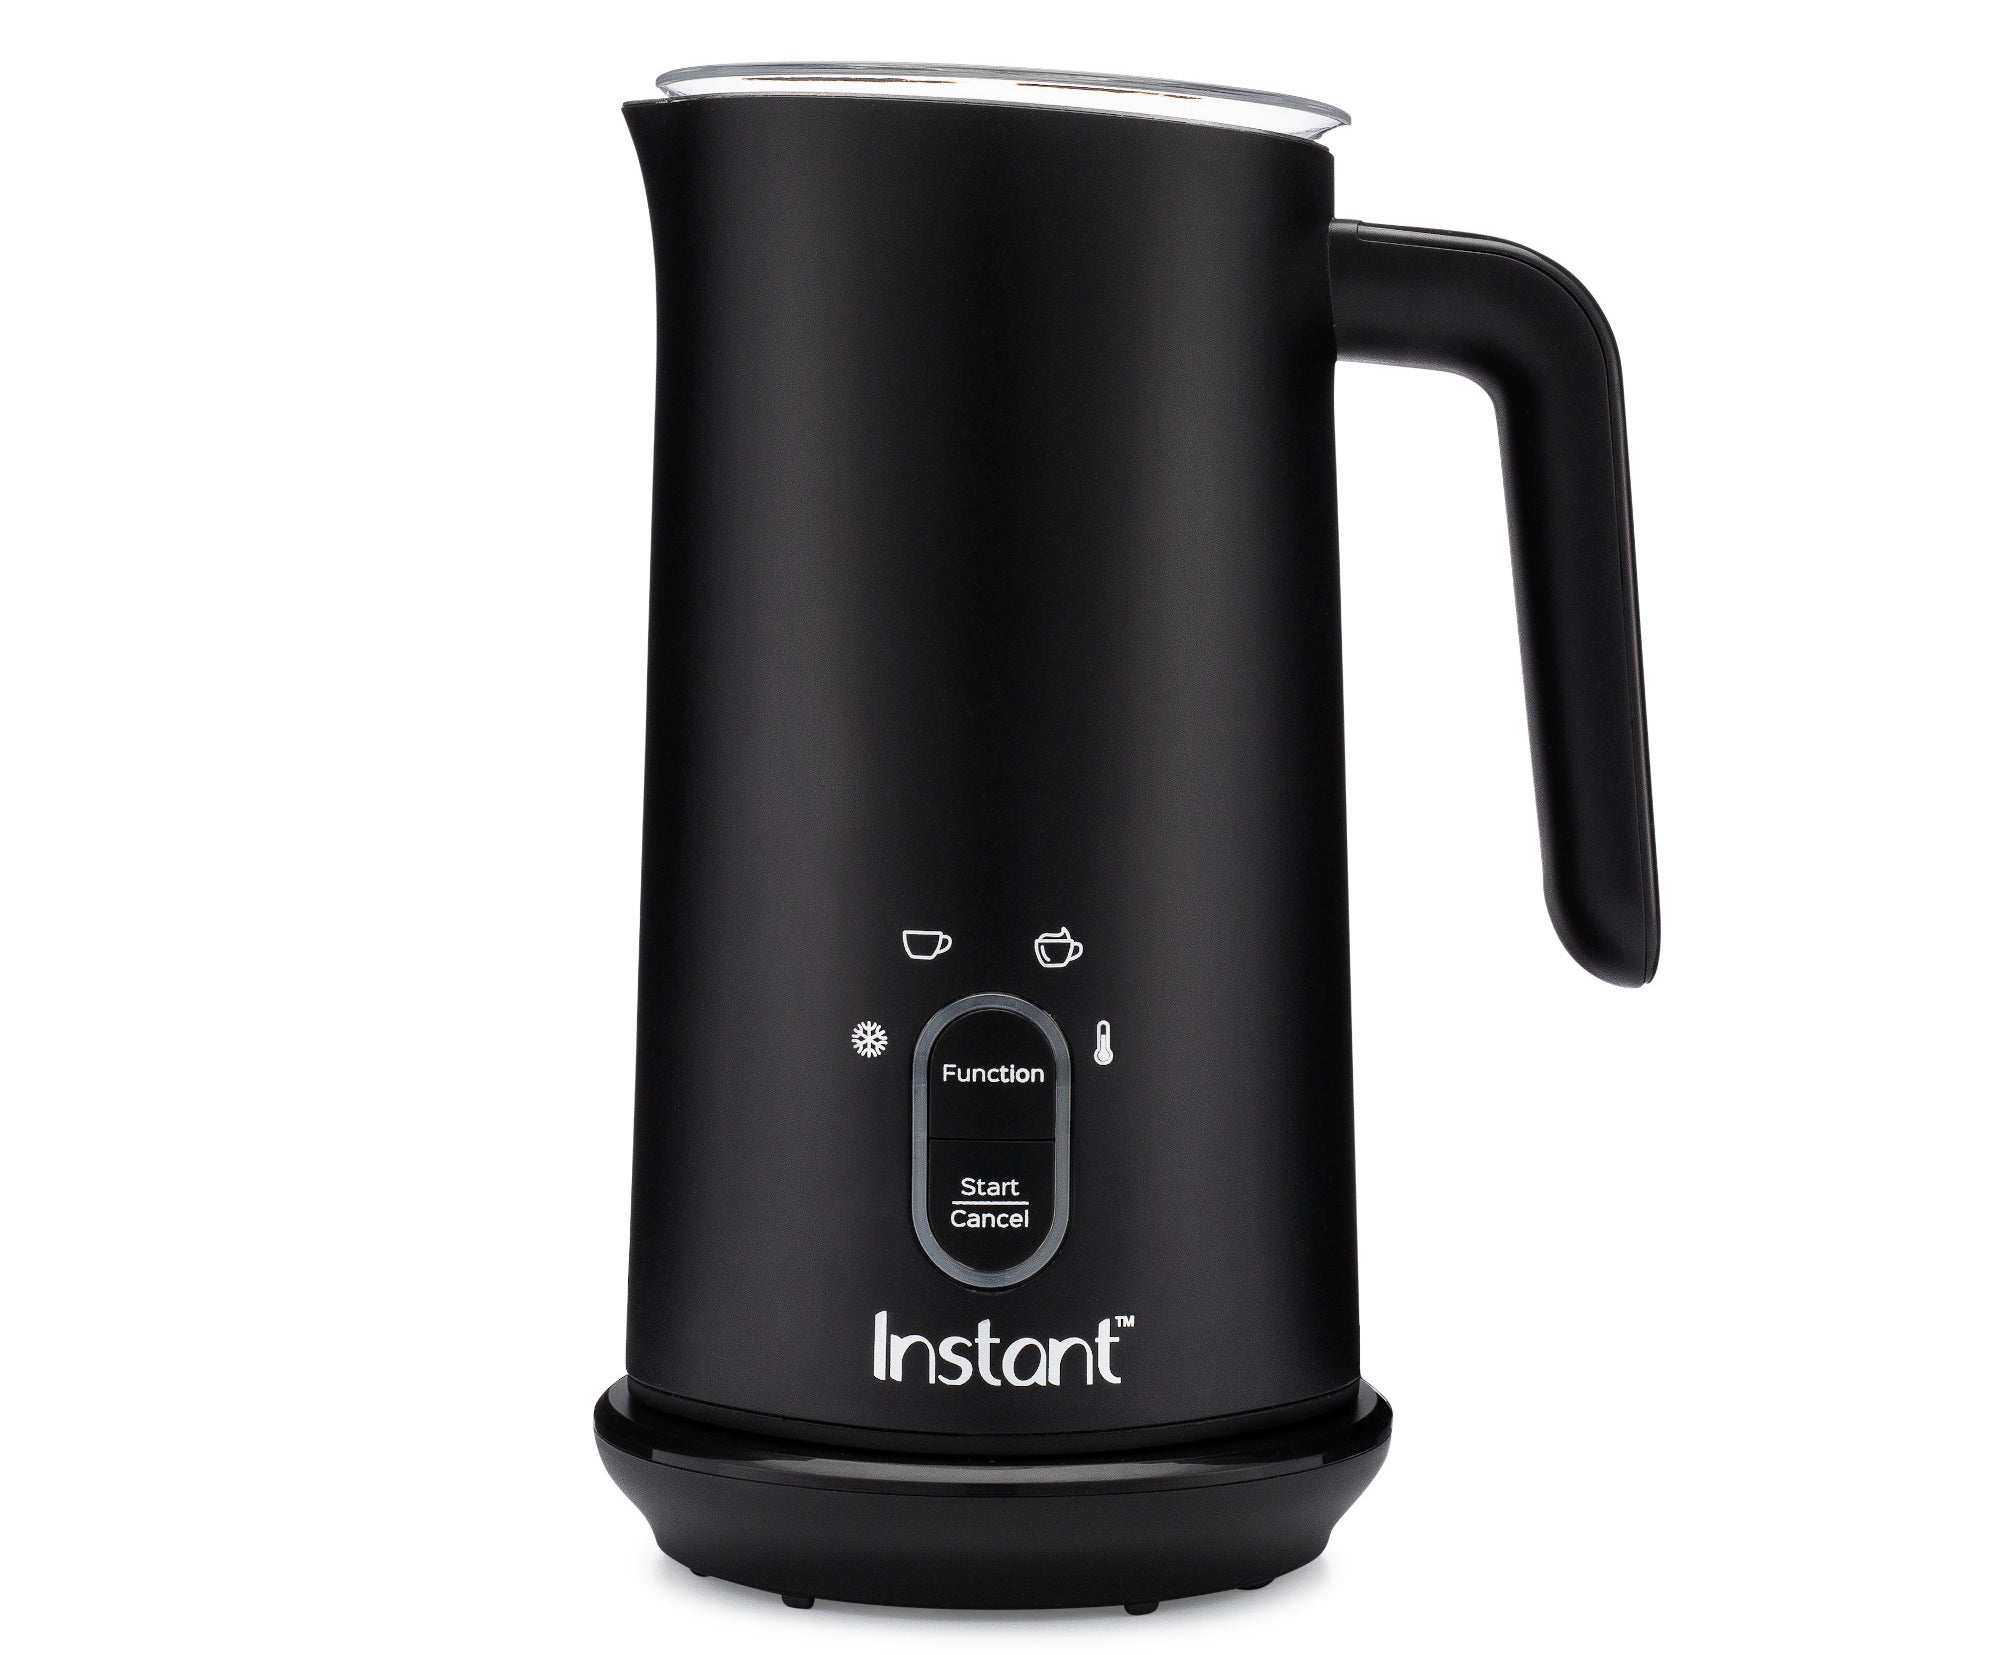 The black Milk Frother